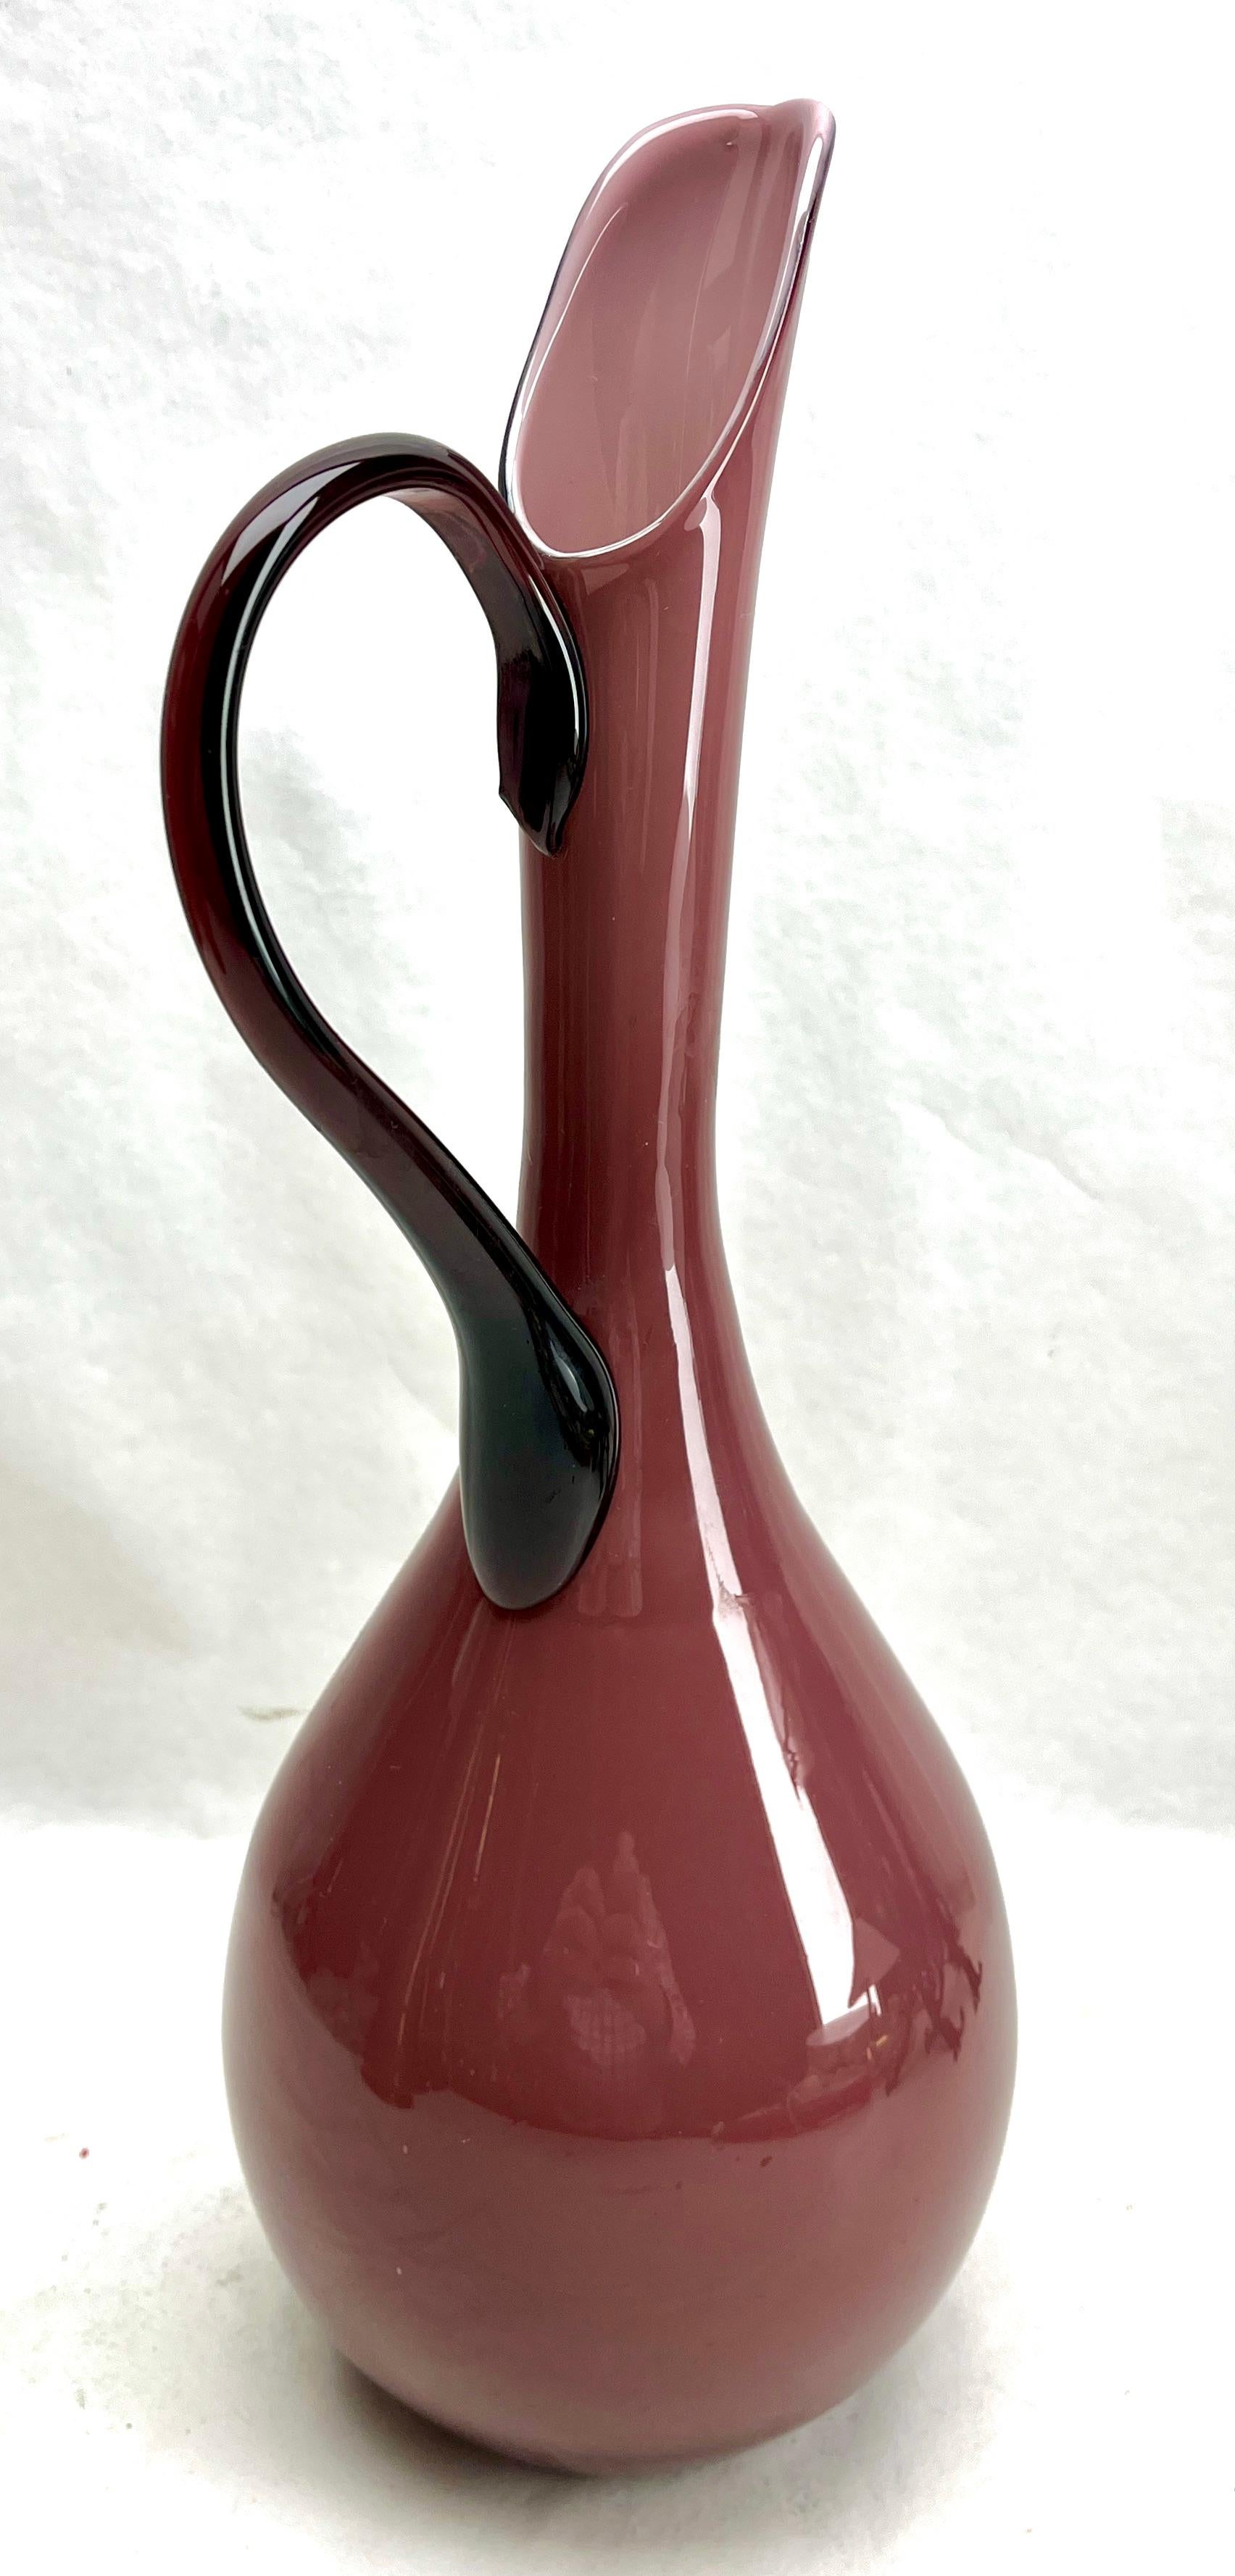 Vintage Italian Empoli  Murano cased art glass pitcher
Weight: 1 Kg
Hand blown cased glass pitcher with handle made in the mid-1955s  Irresistibly chic  glass encased in creme glass set off by a  classical Murano glass handle. 
Excellent